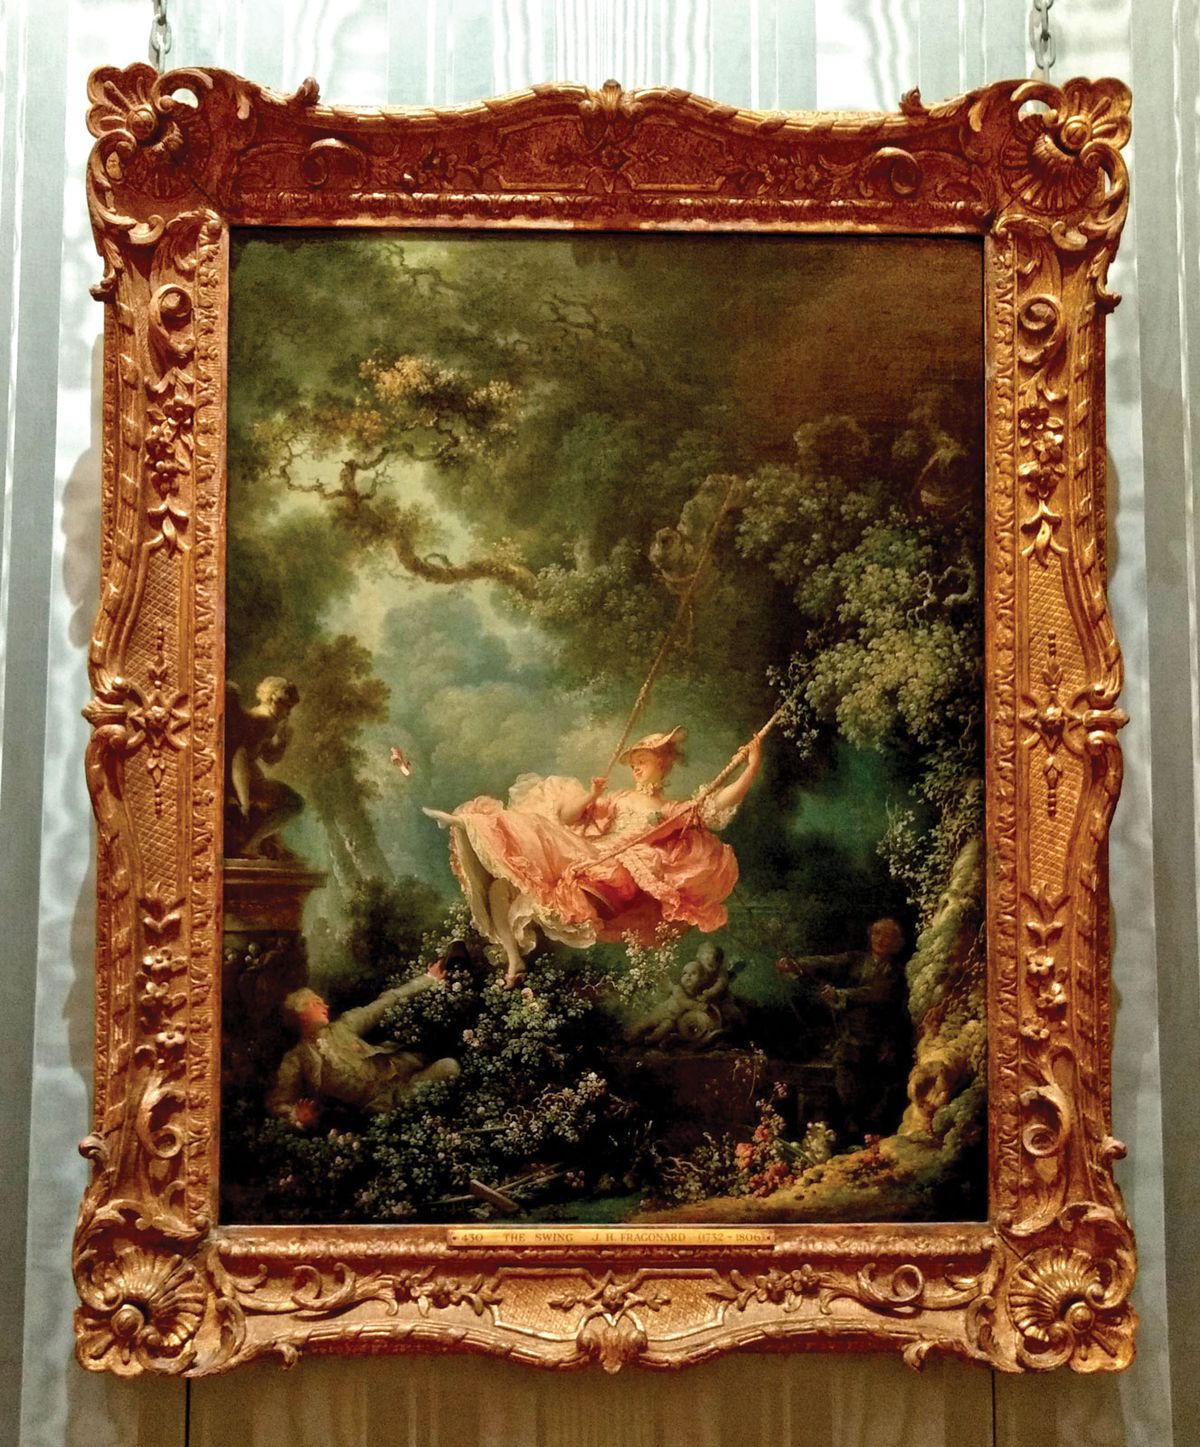 A Wallace collection show on Fragonard, featuring The Swing (1767) from its collection, is now on the cards Courtesy of the Wallace Collection © Philafrenzy